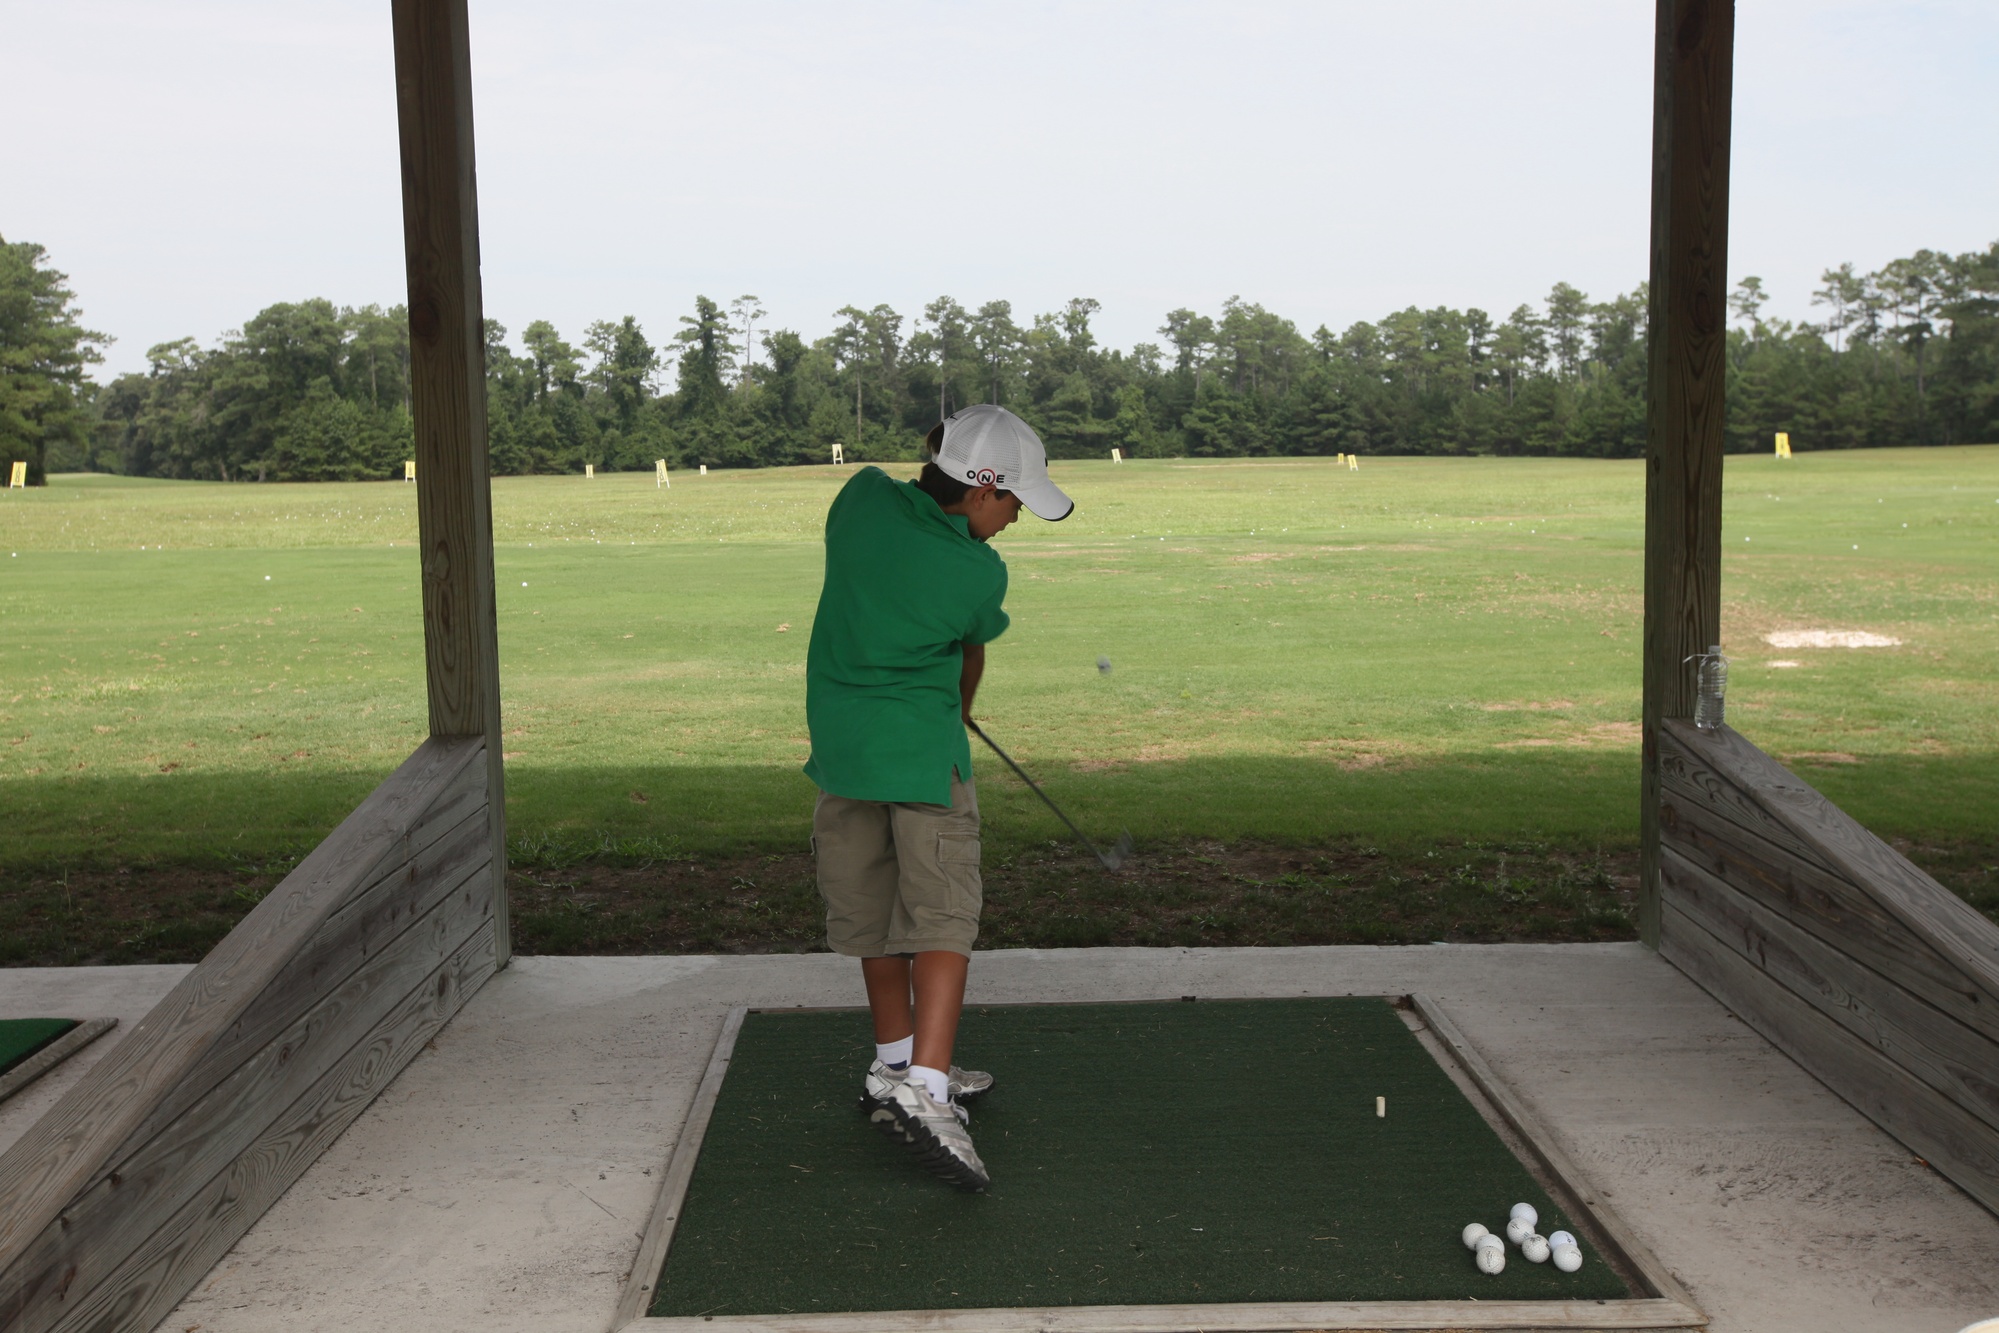 Dating Golf Clubs and Identifying Who Made Them - Driving Range Heroes